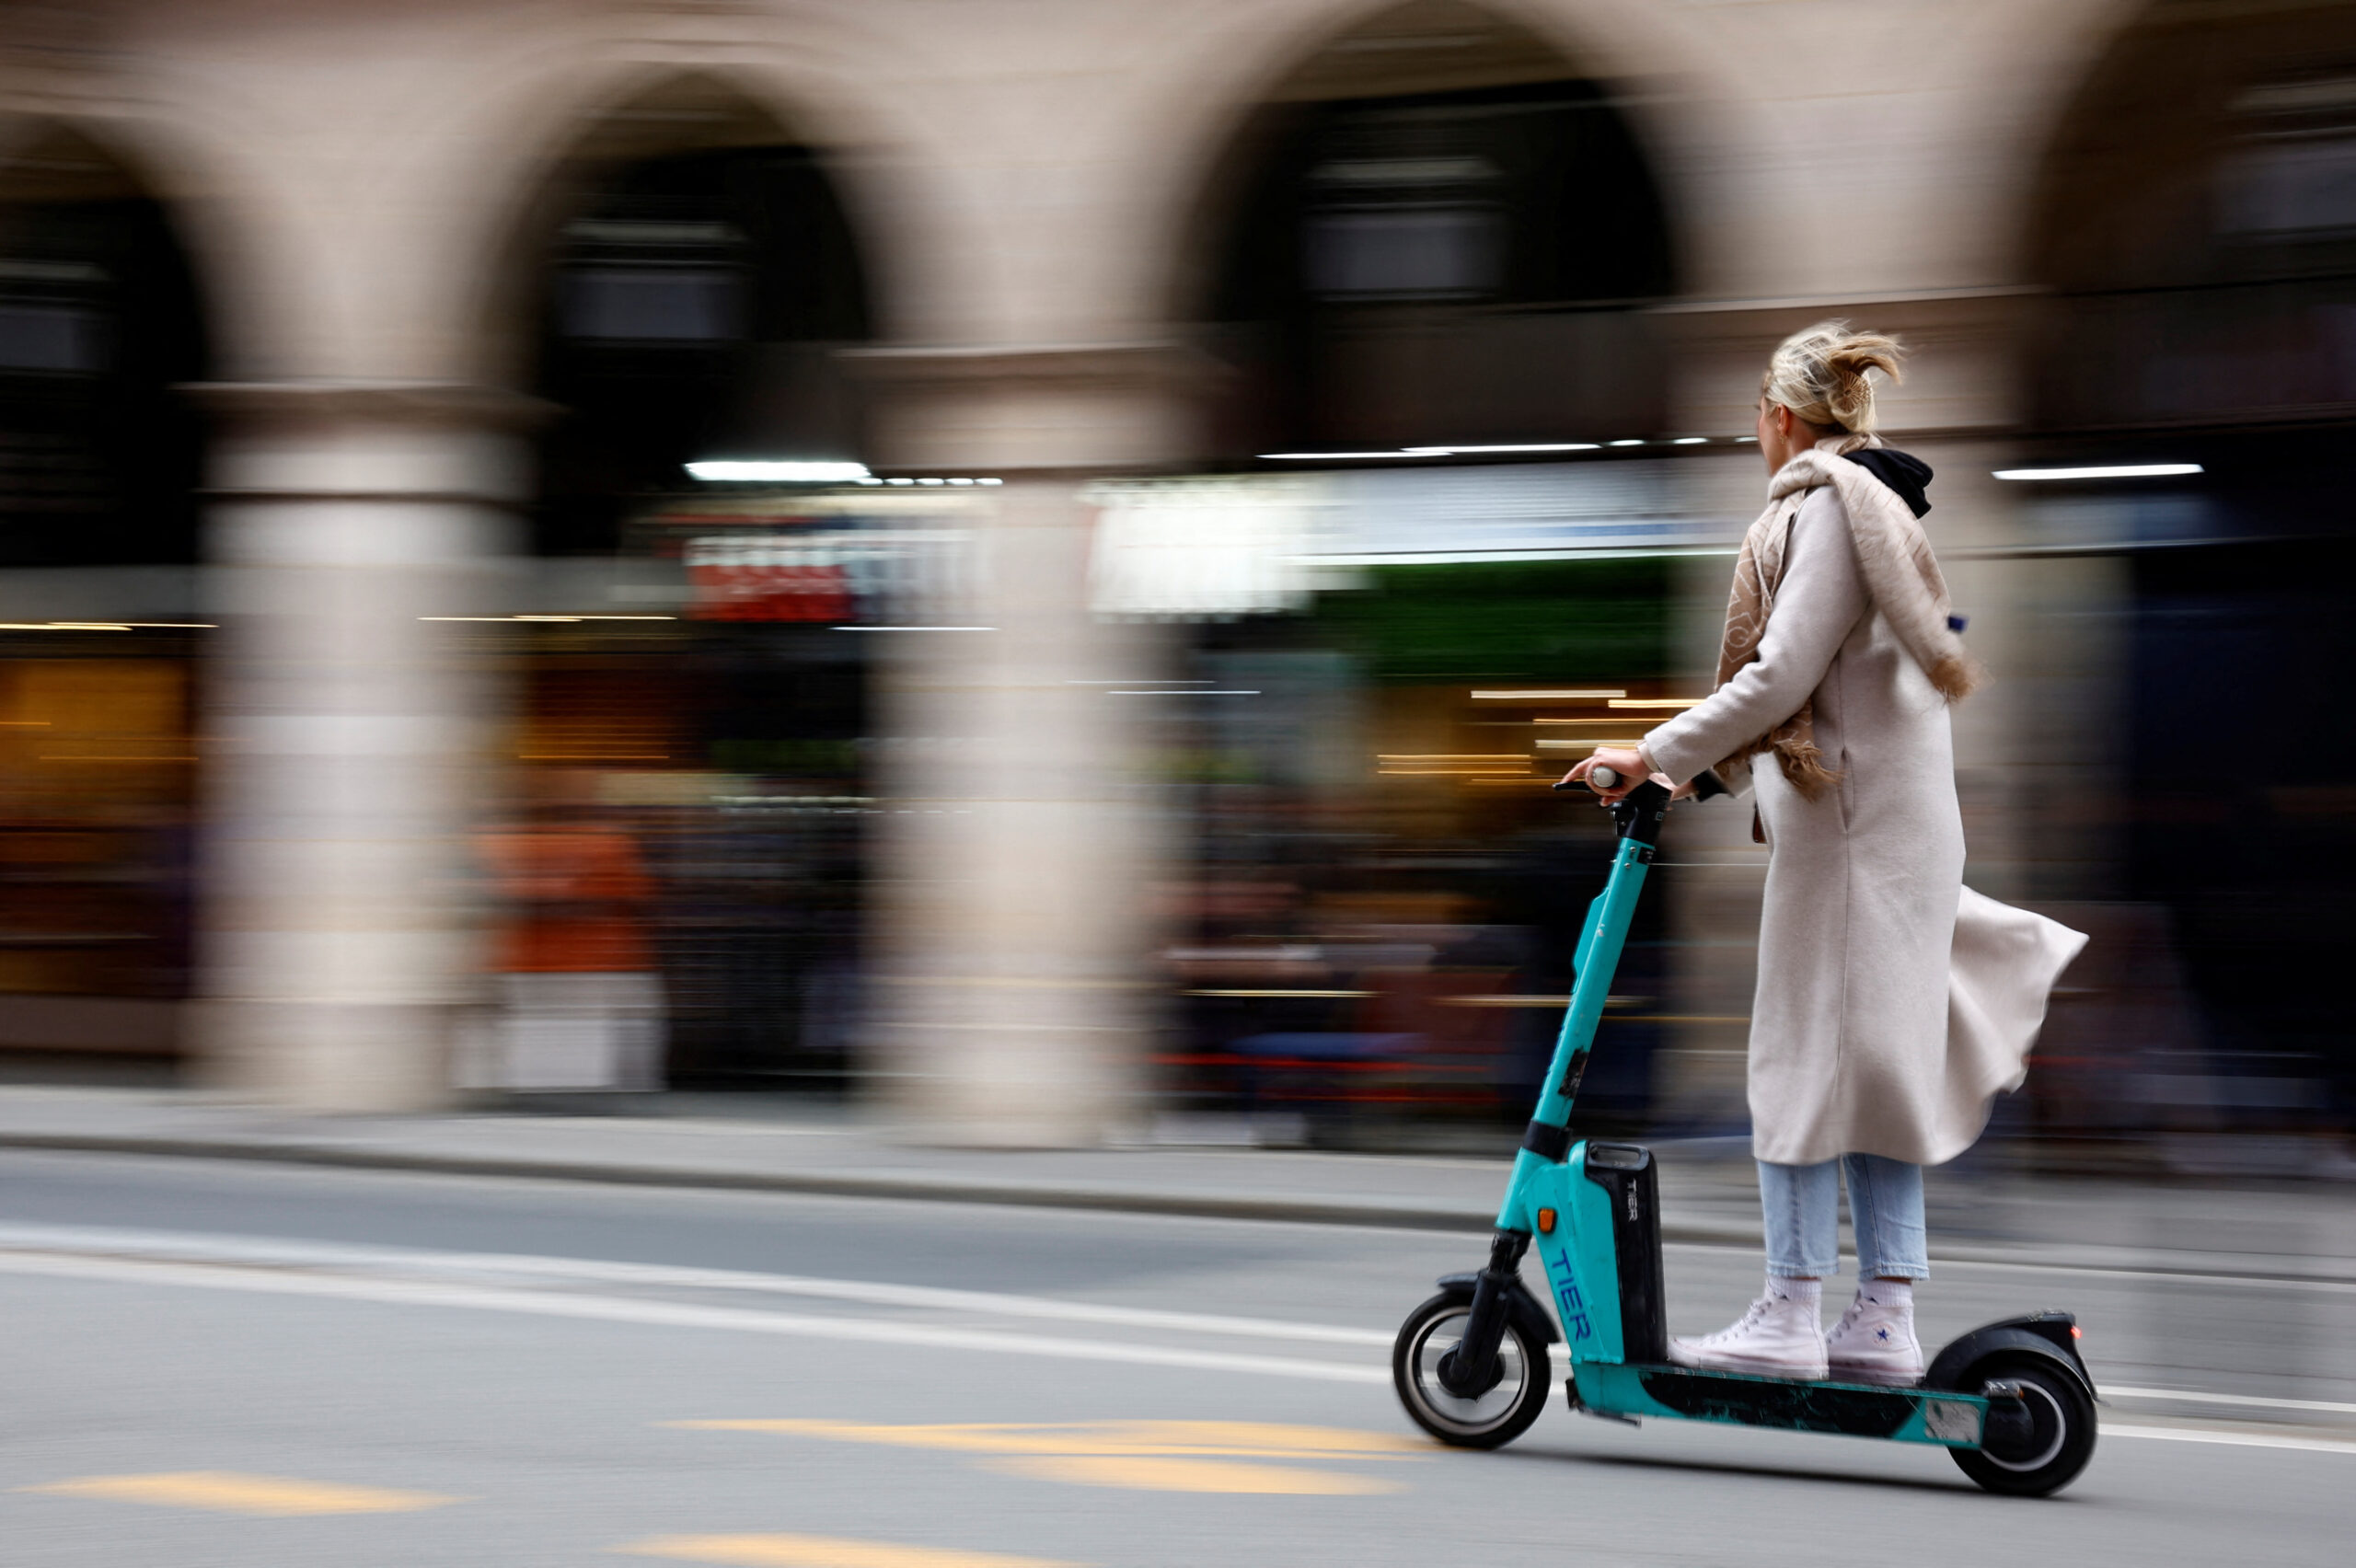 The ban applies to rental scooters which have been offered by several operators since 2018.